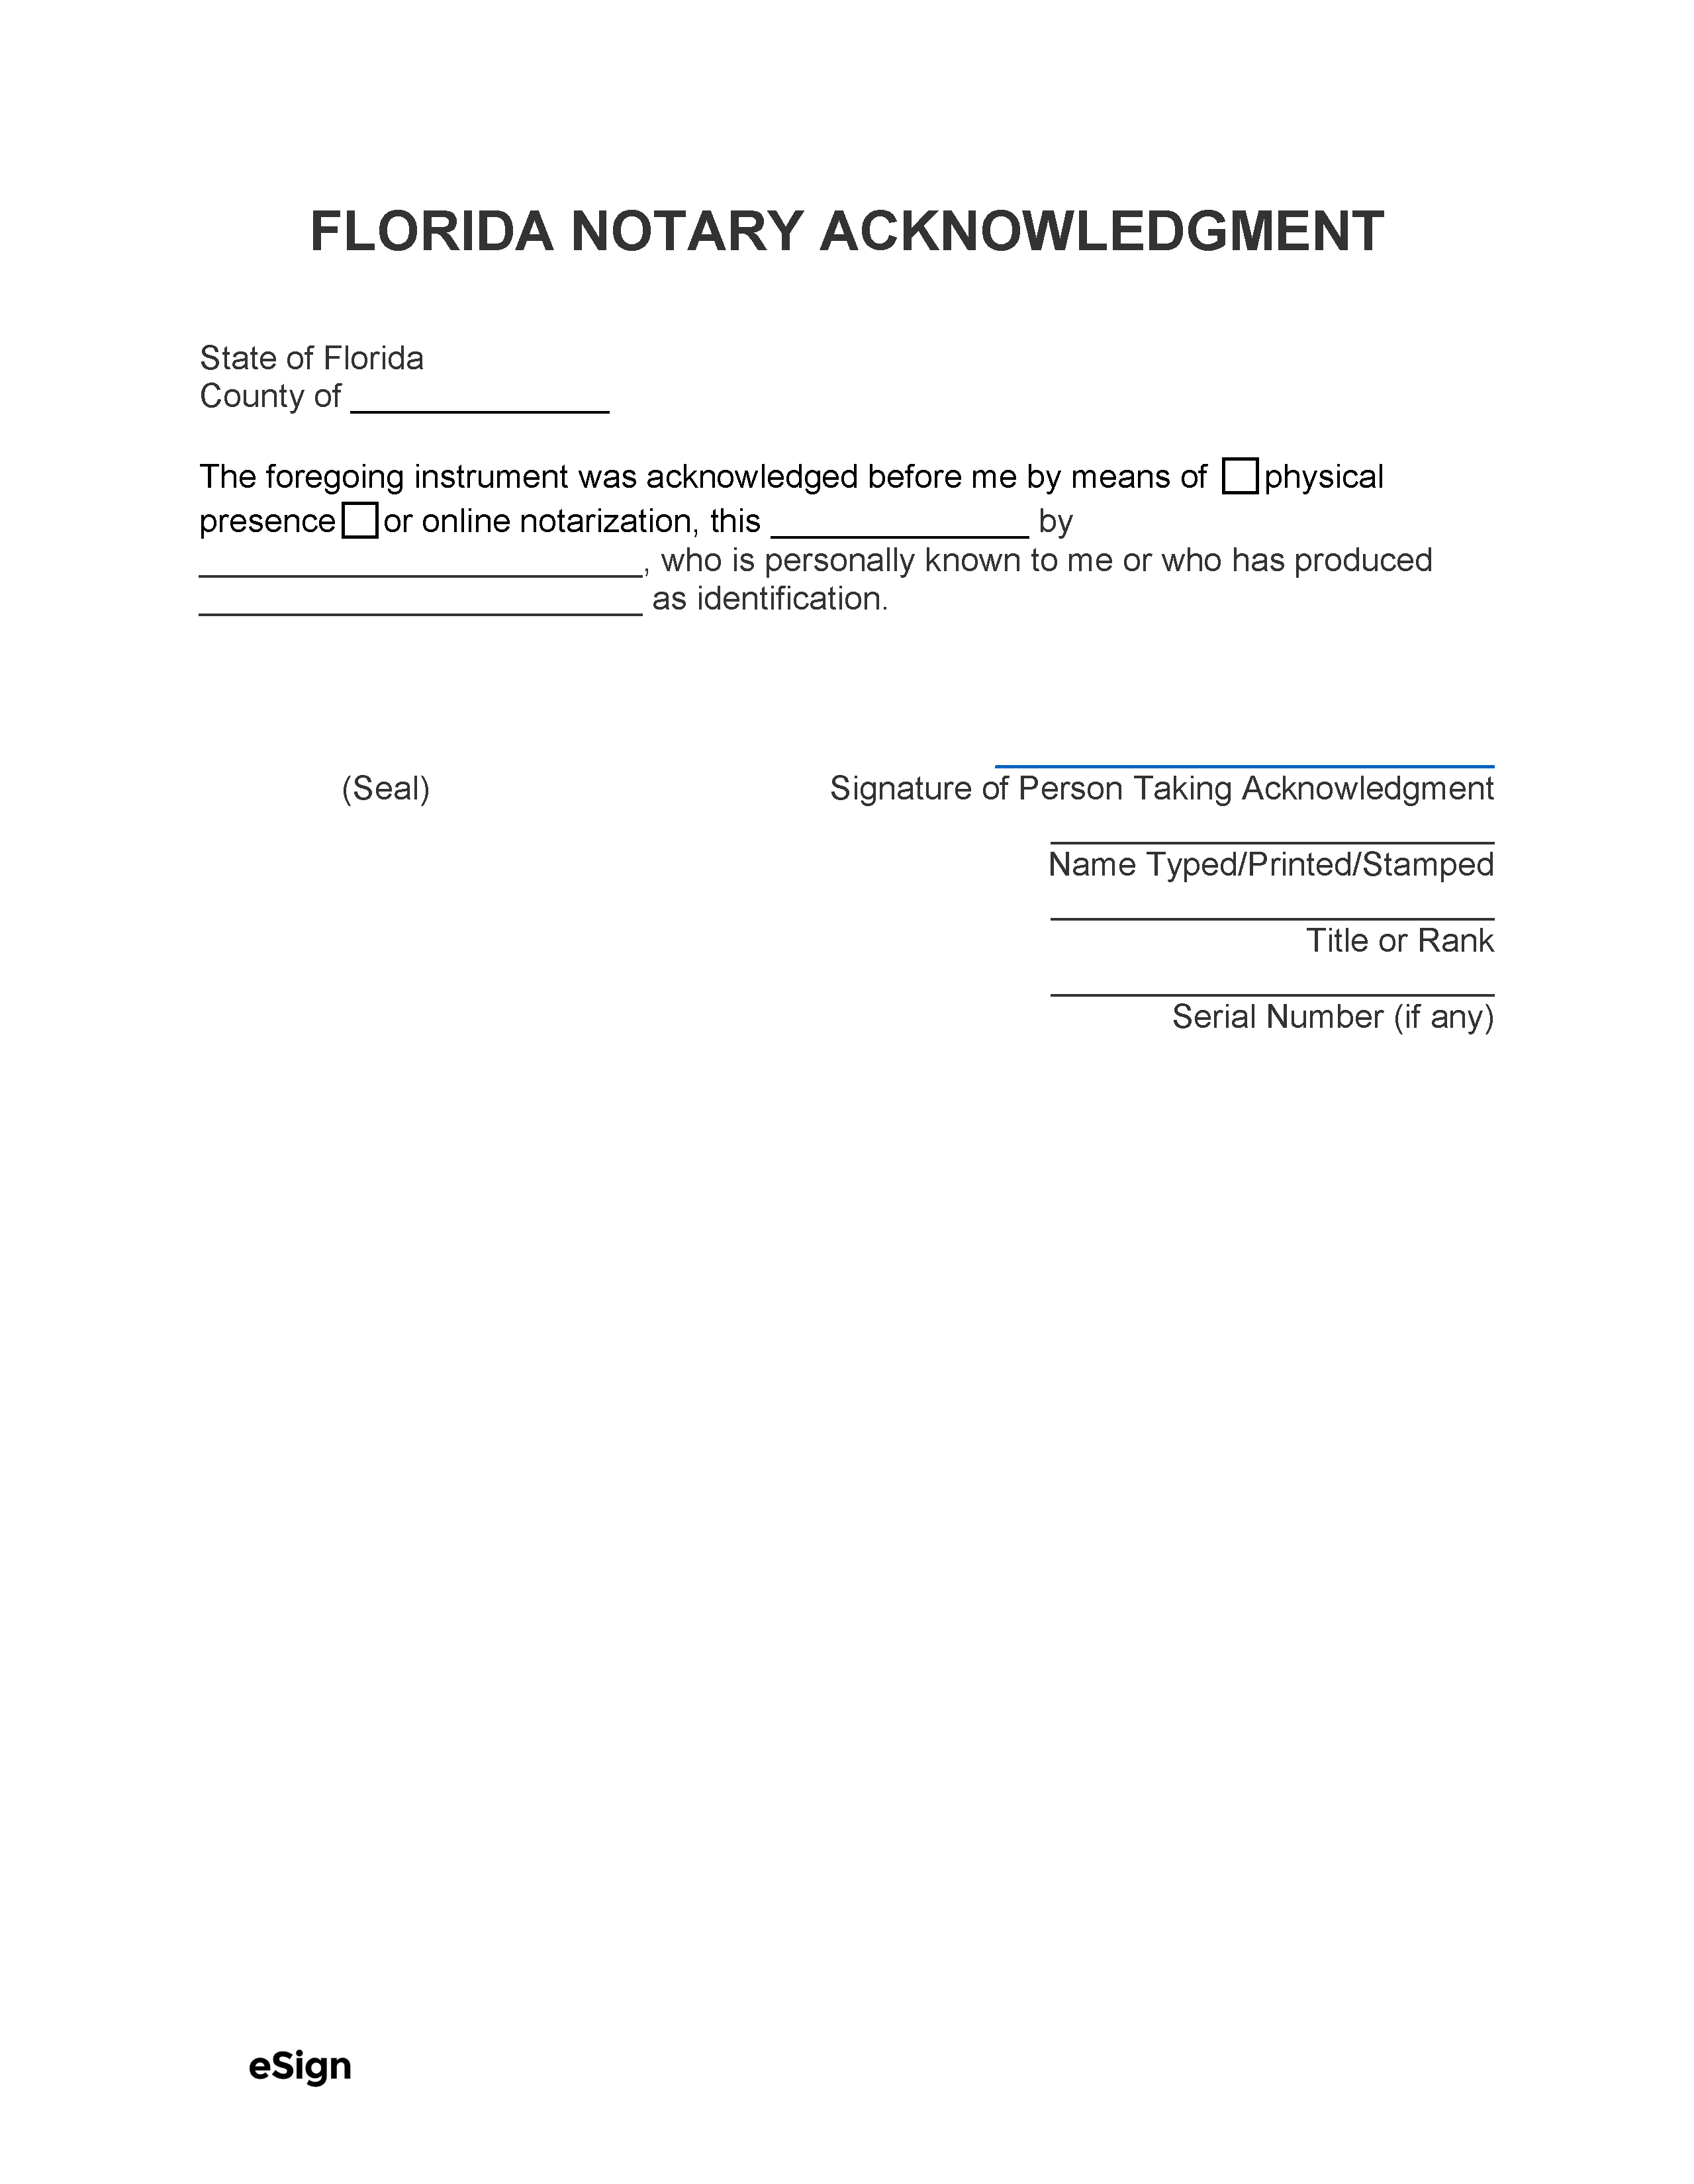 florida-notary-acknowledgement-form-2023-printable-forms-free-online